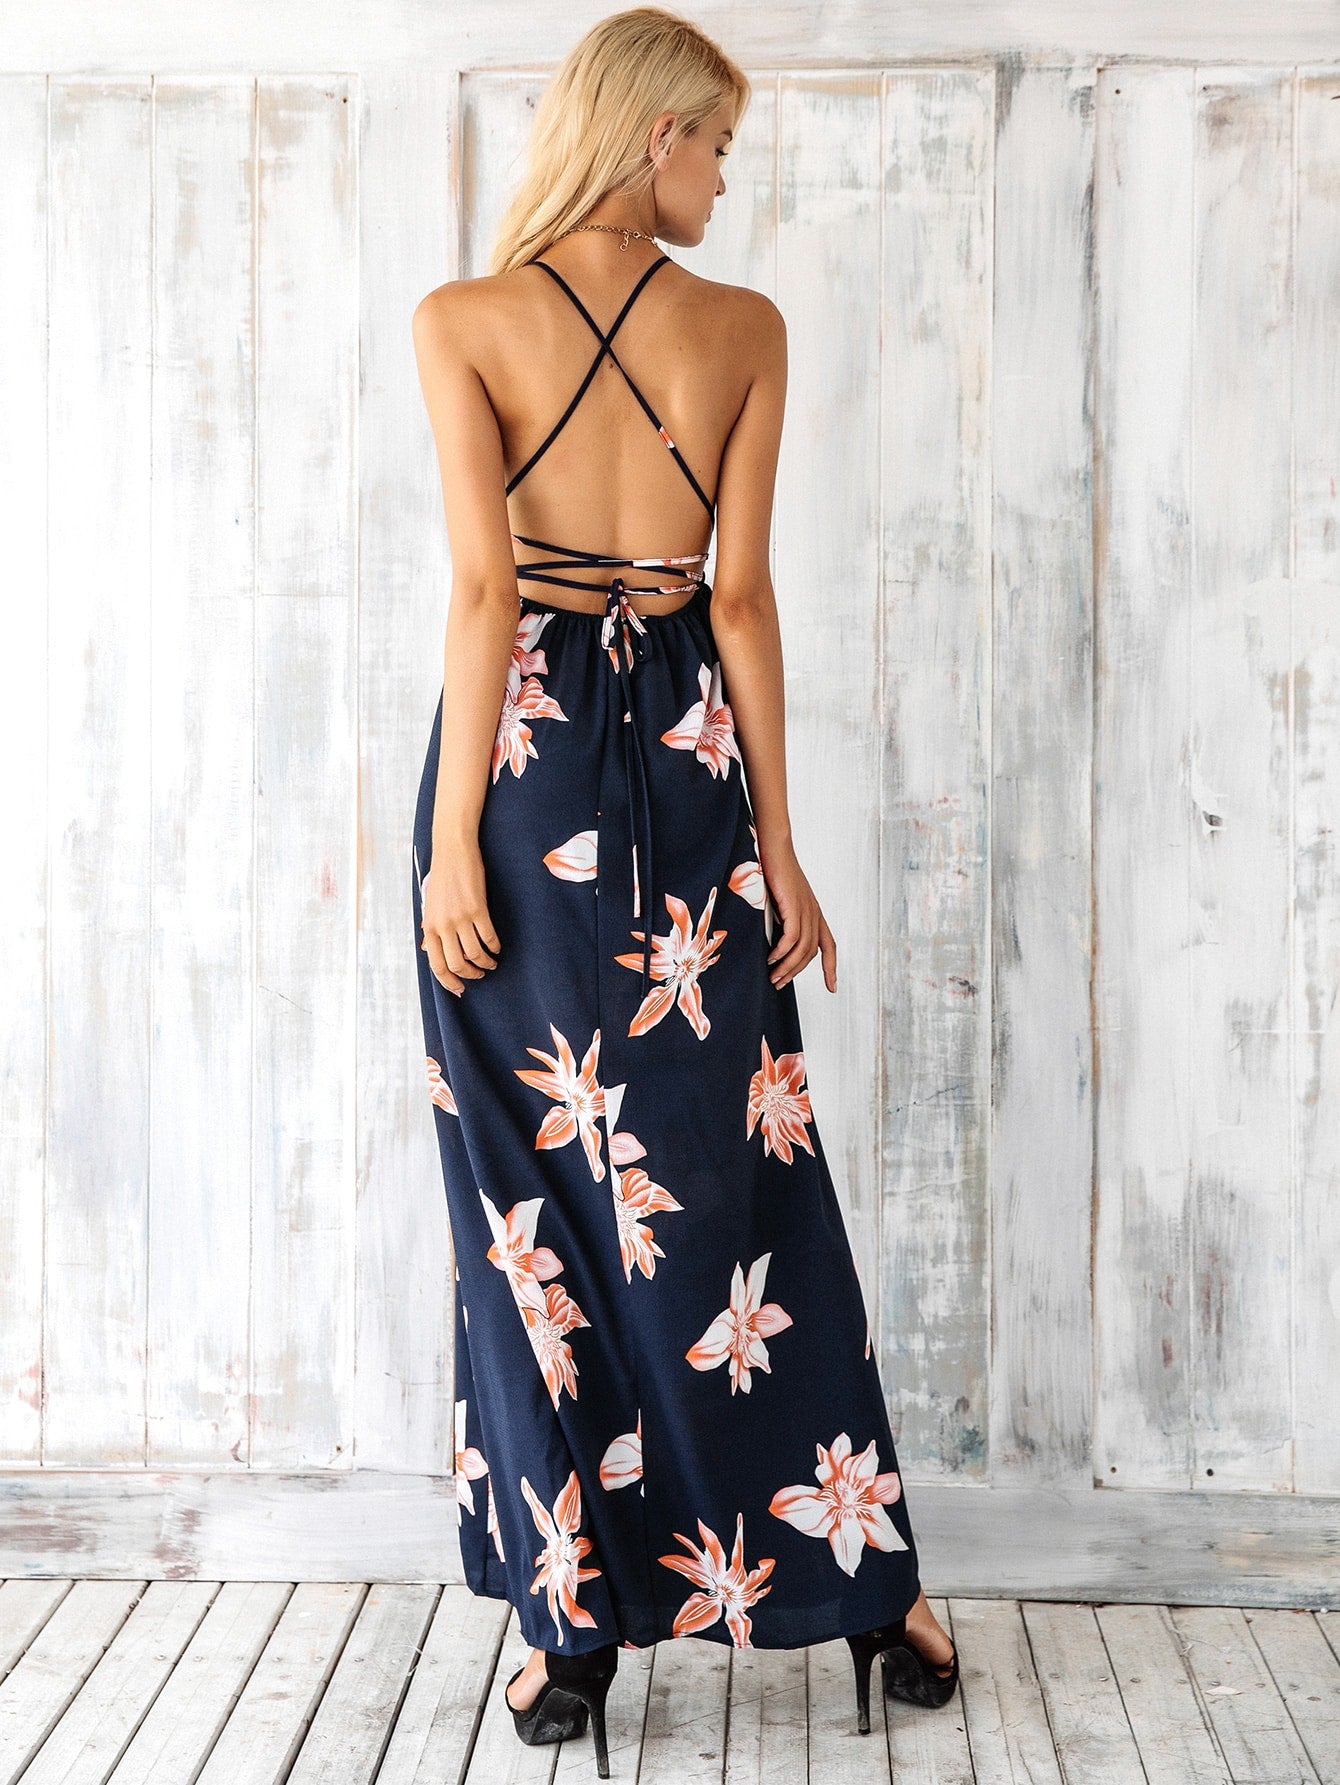 Simplee Floral Lace Up Backless Wrap Slip Dress